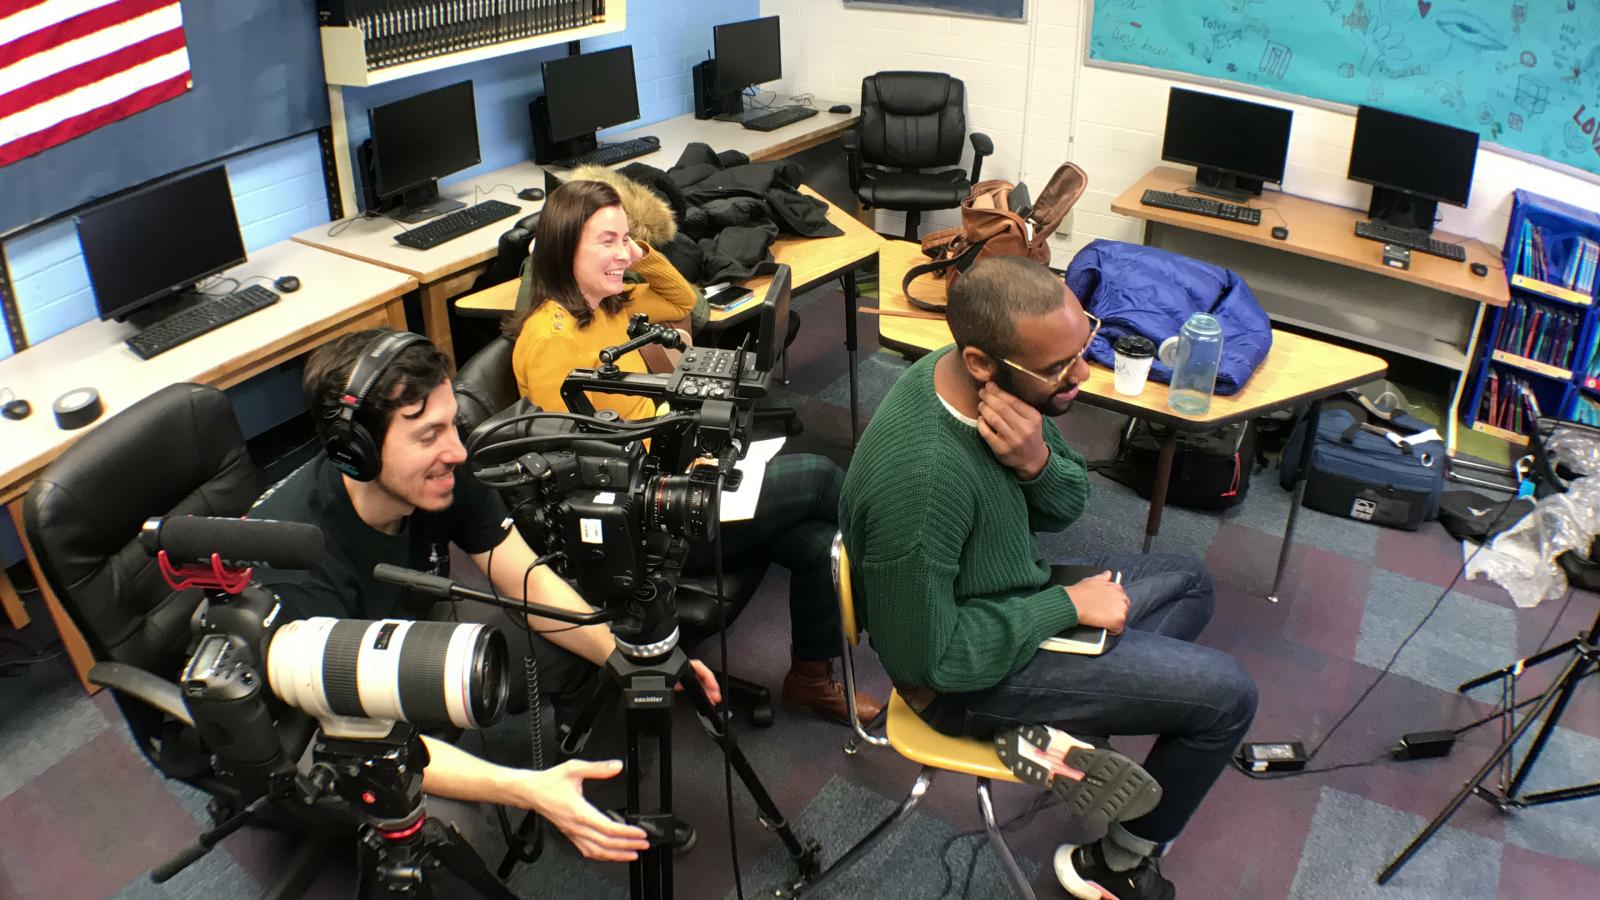 Overhead view of a documentary camera crew and interview equipment in a computer classroom